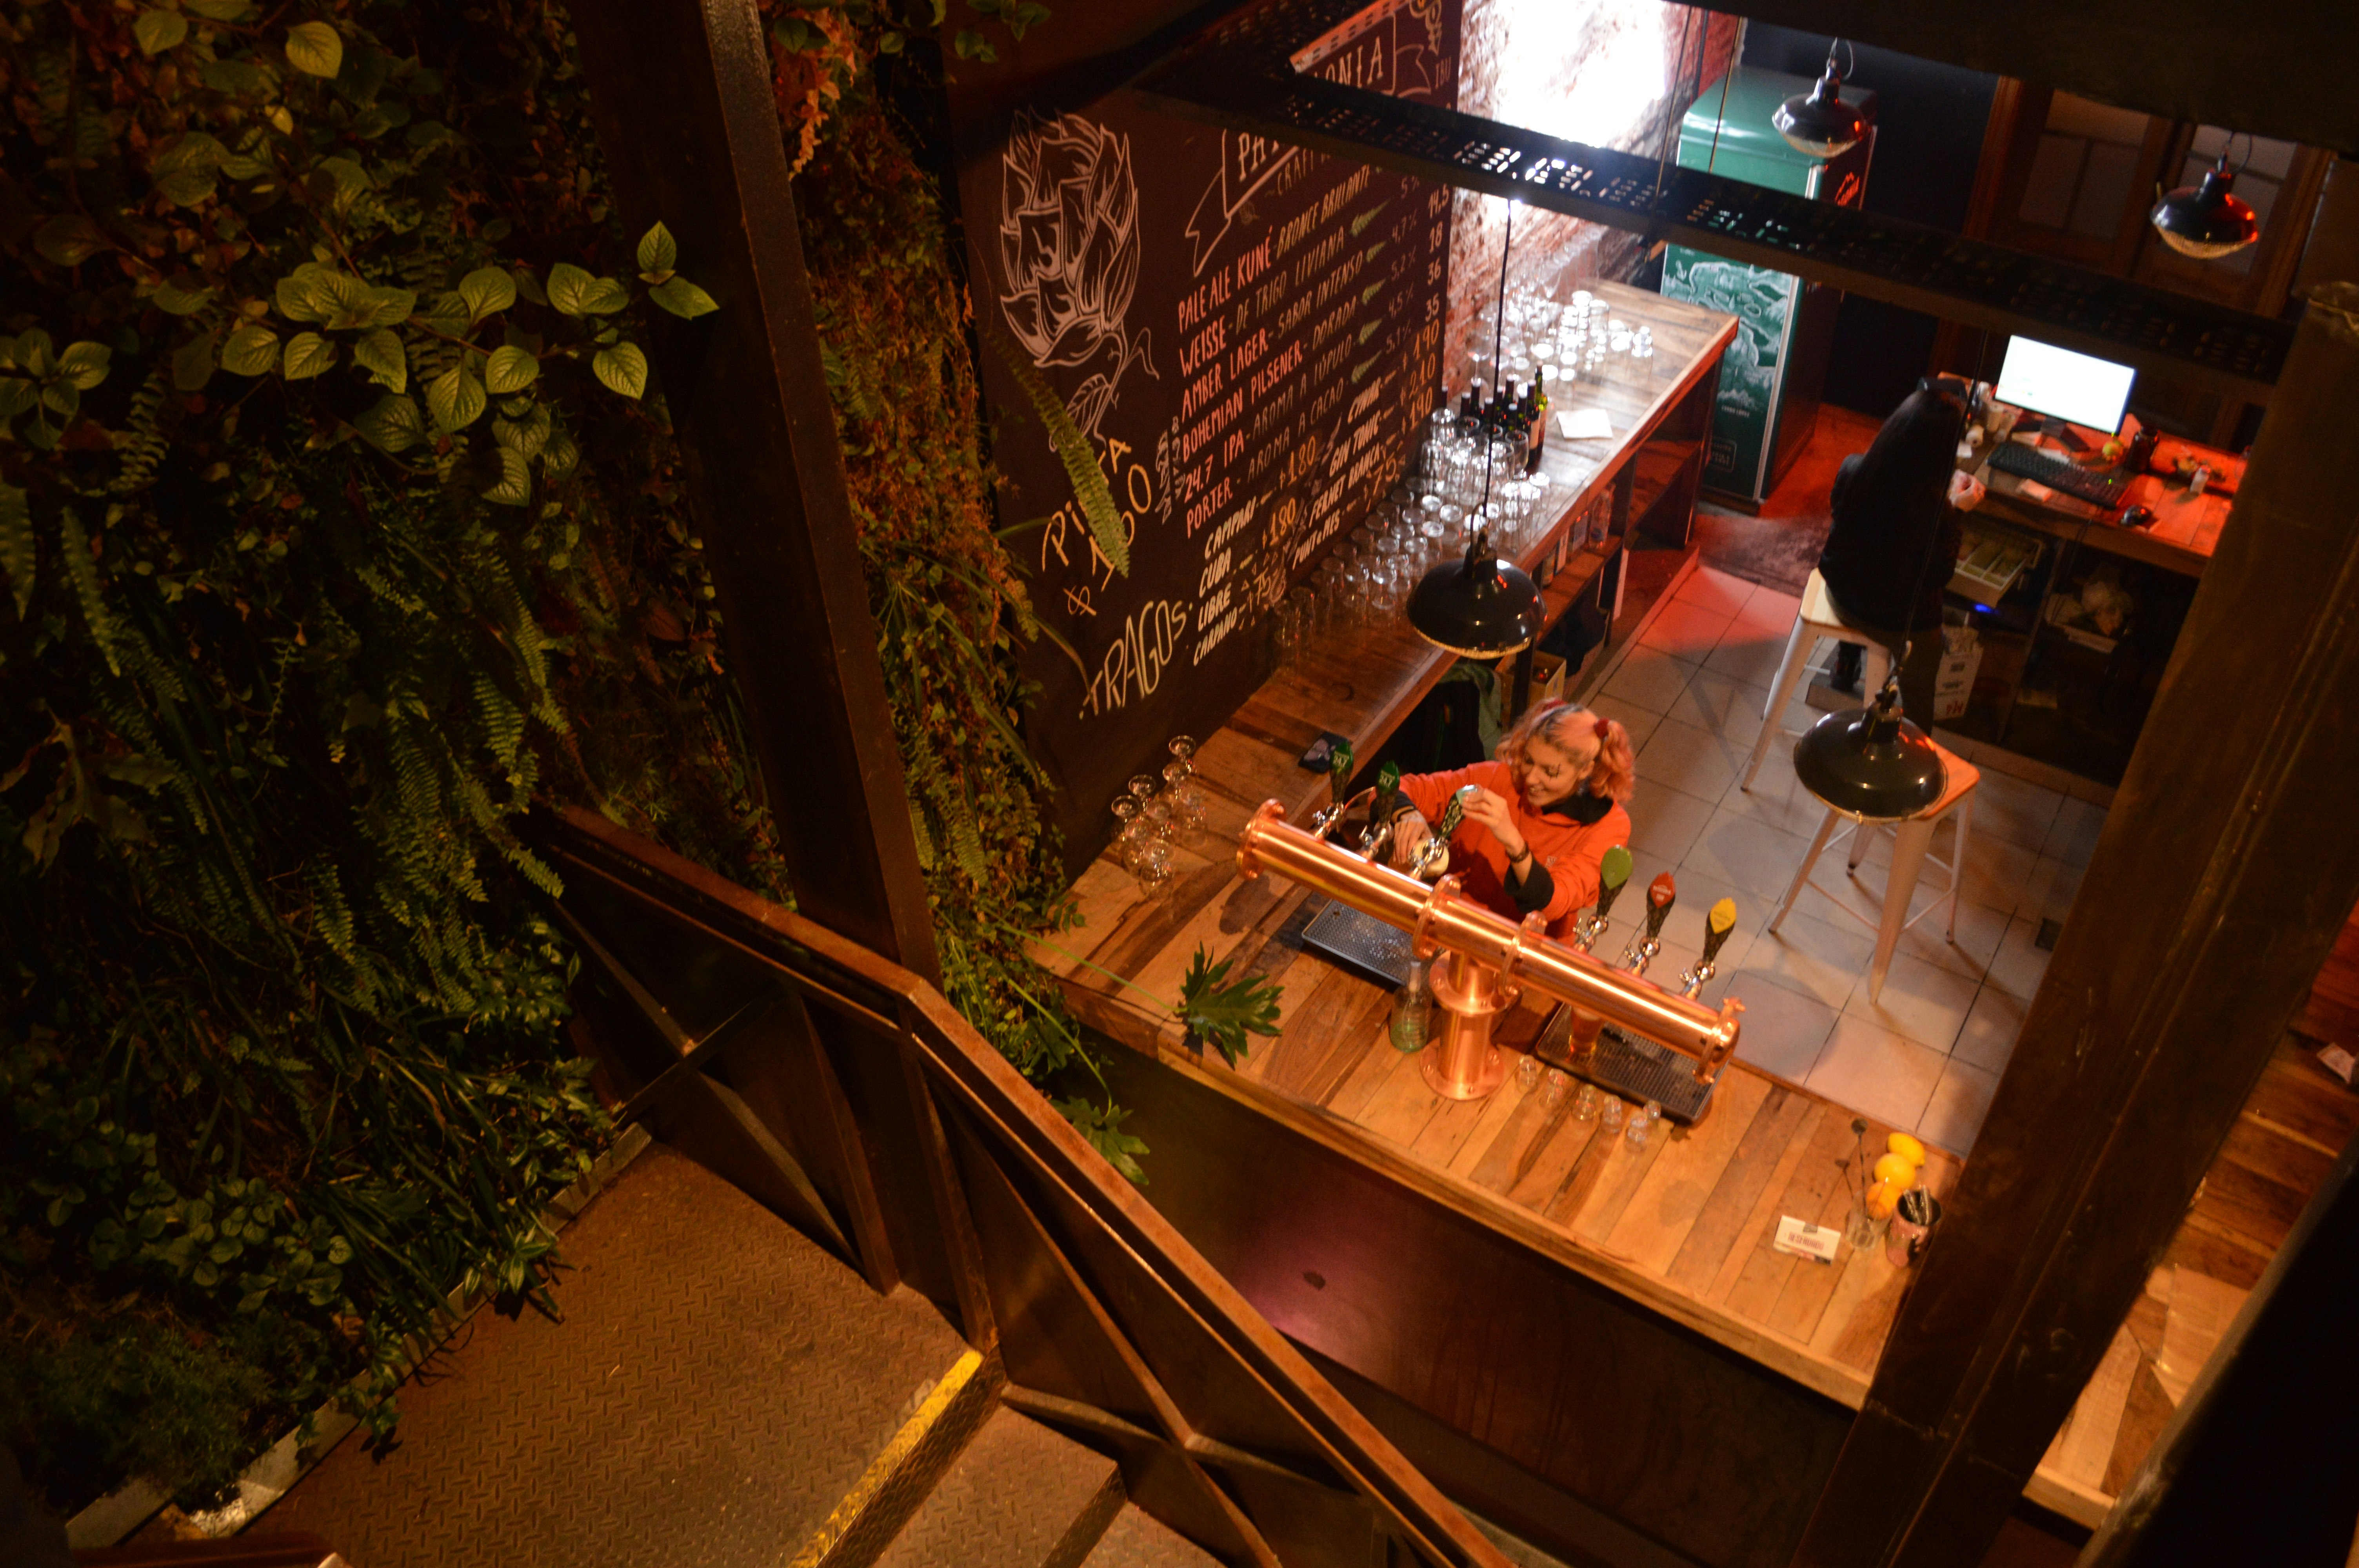 Overhead view of a bartender filling a glass with beer on tap. Behind the bartender and woman sits on a bar stool facing a computer screen; Buenos Aires rooftop bars